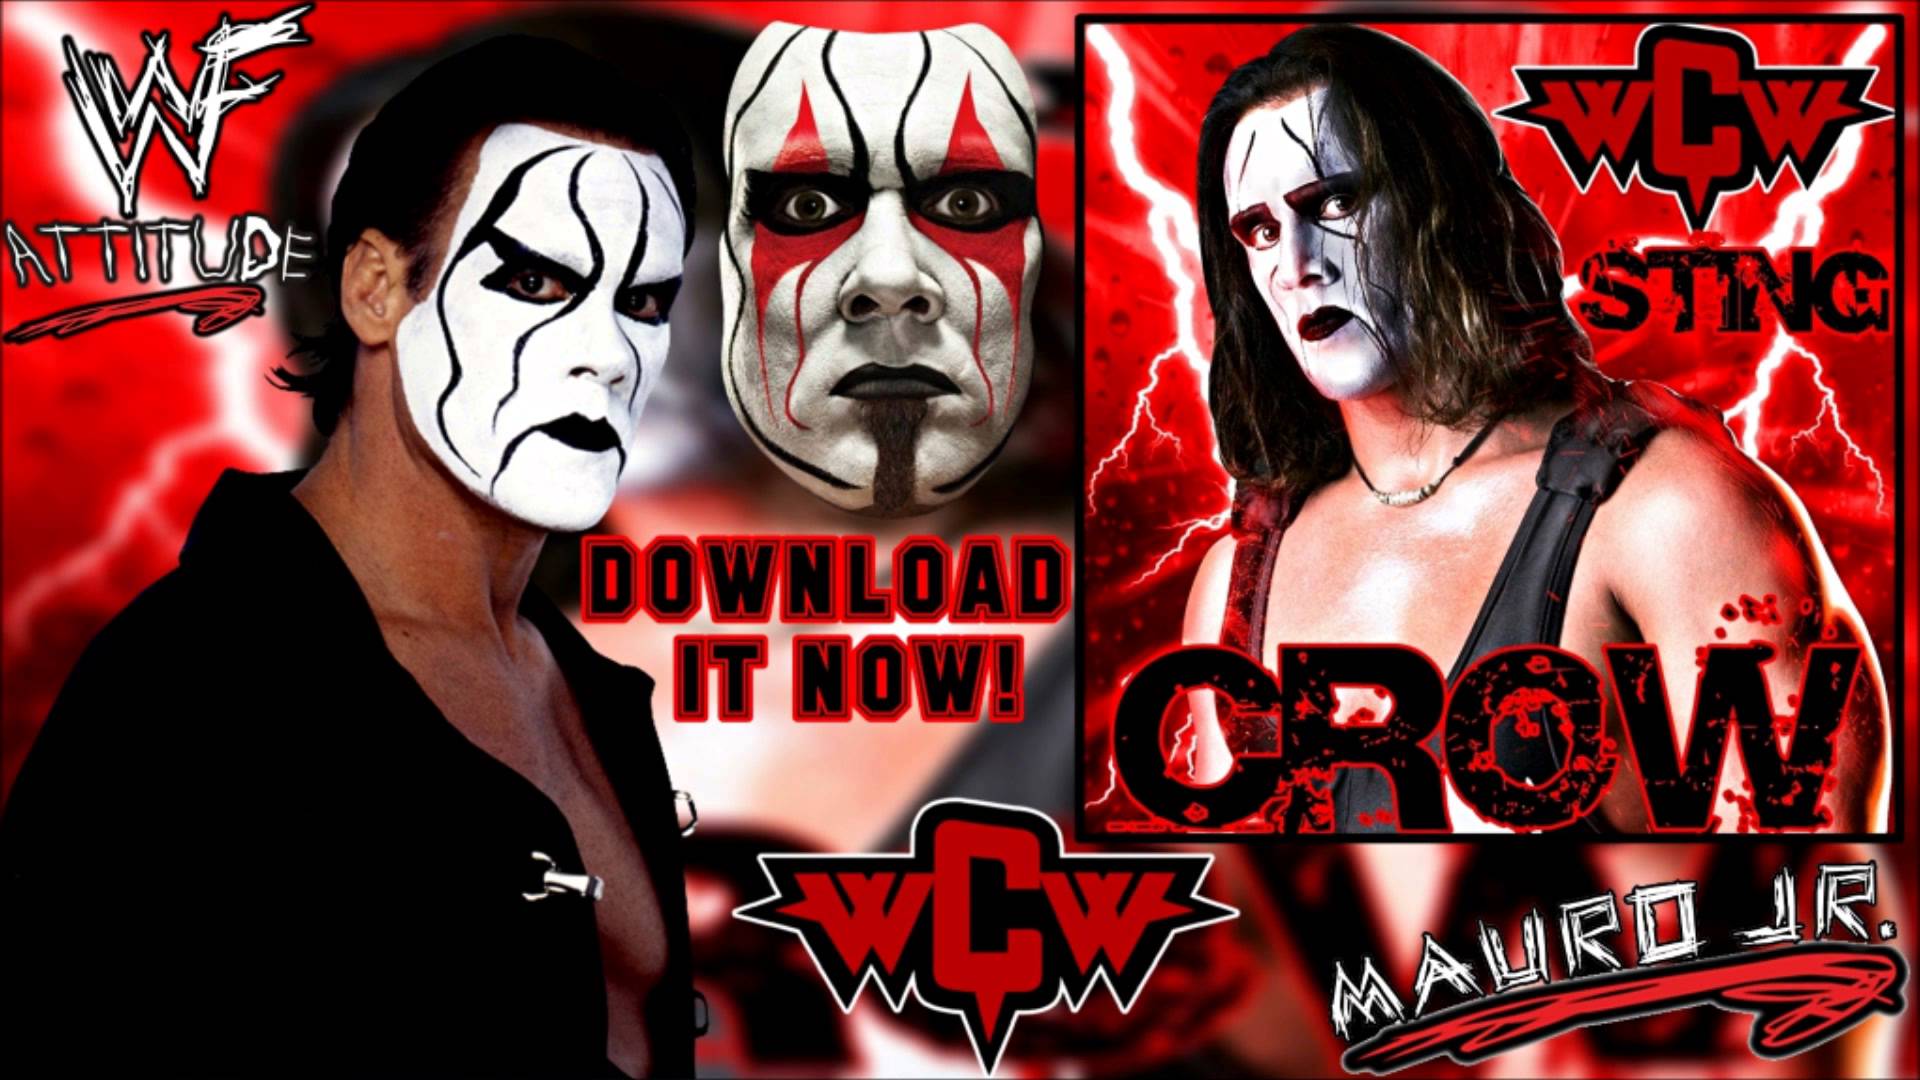 WCW: Crow [Orchestra] (Sting) + Download Link